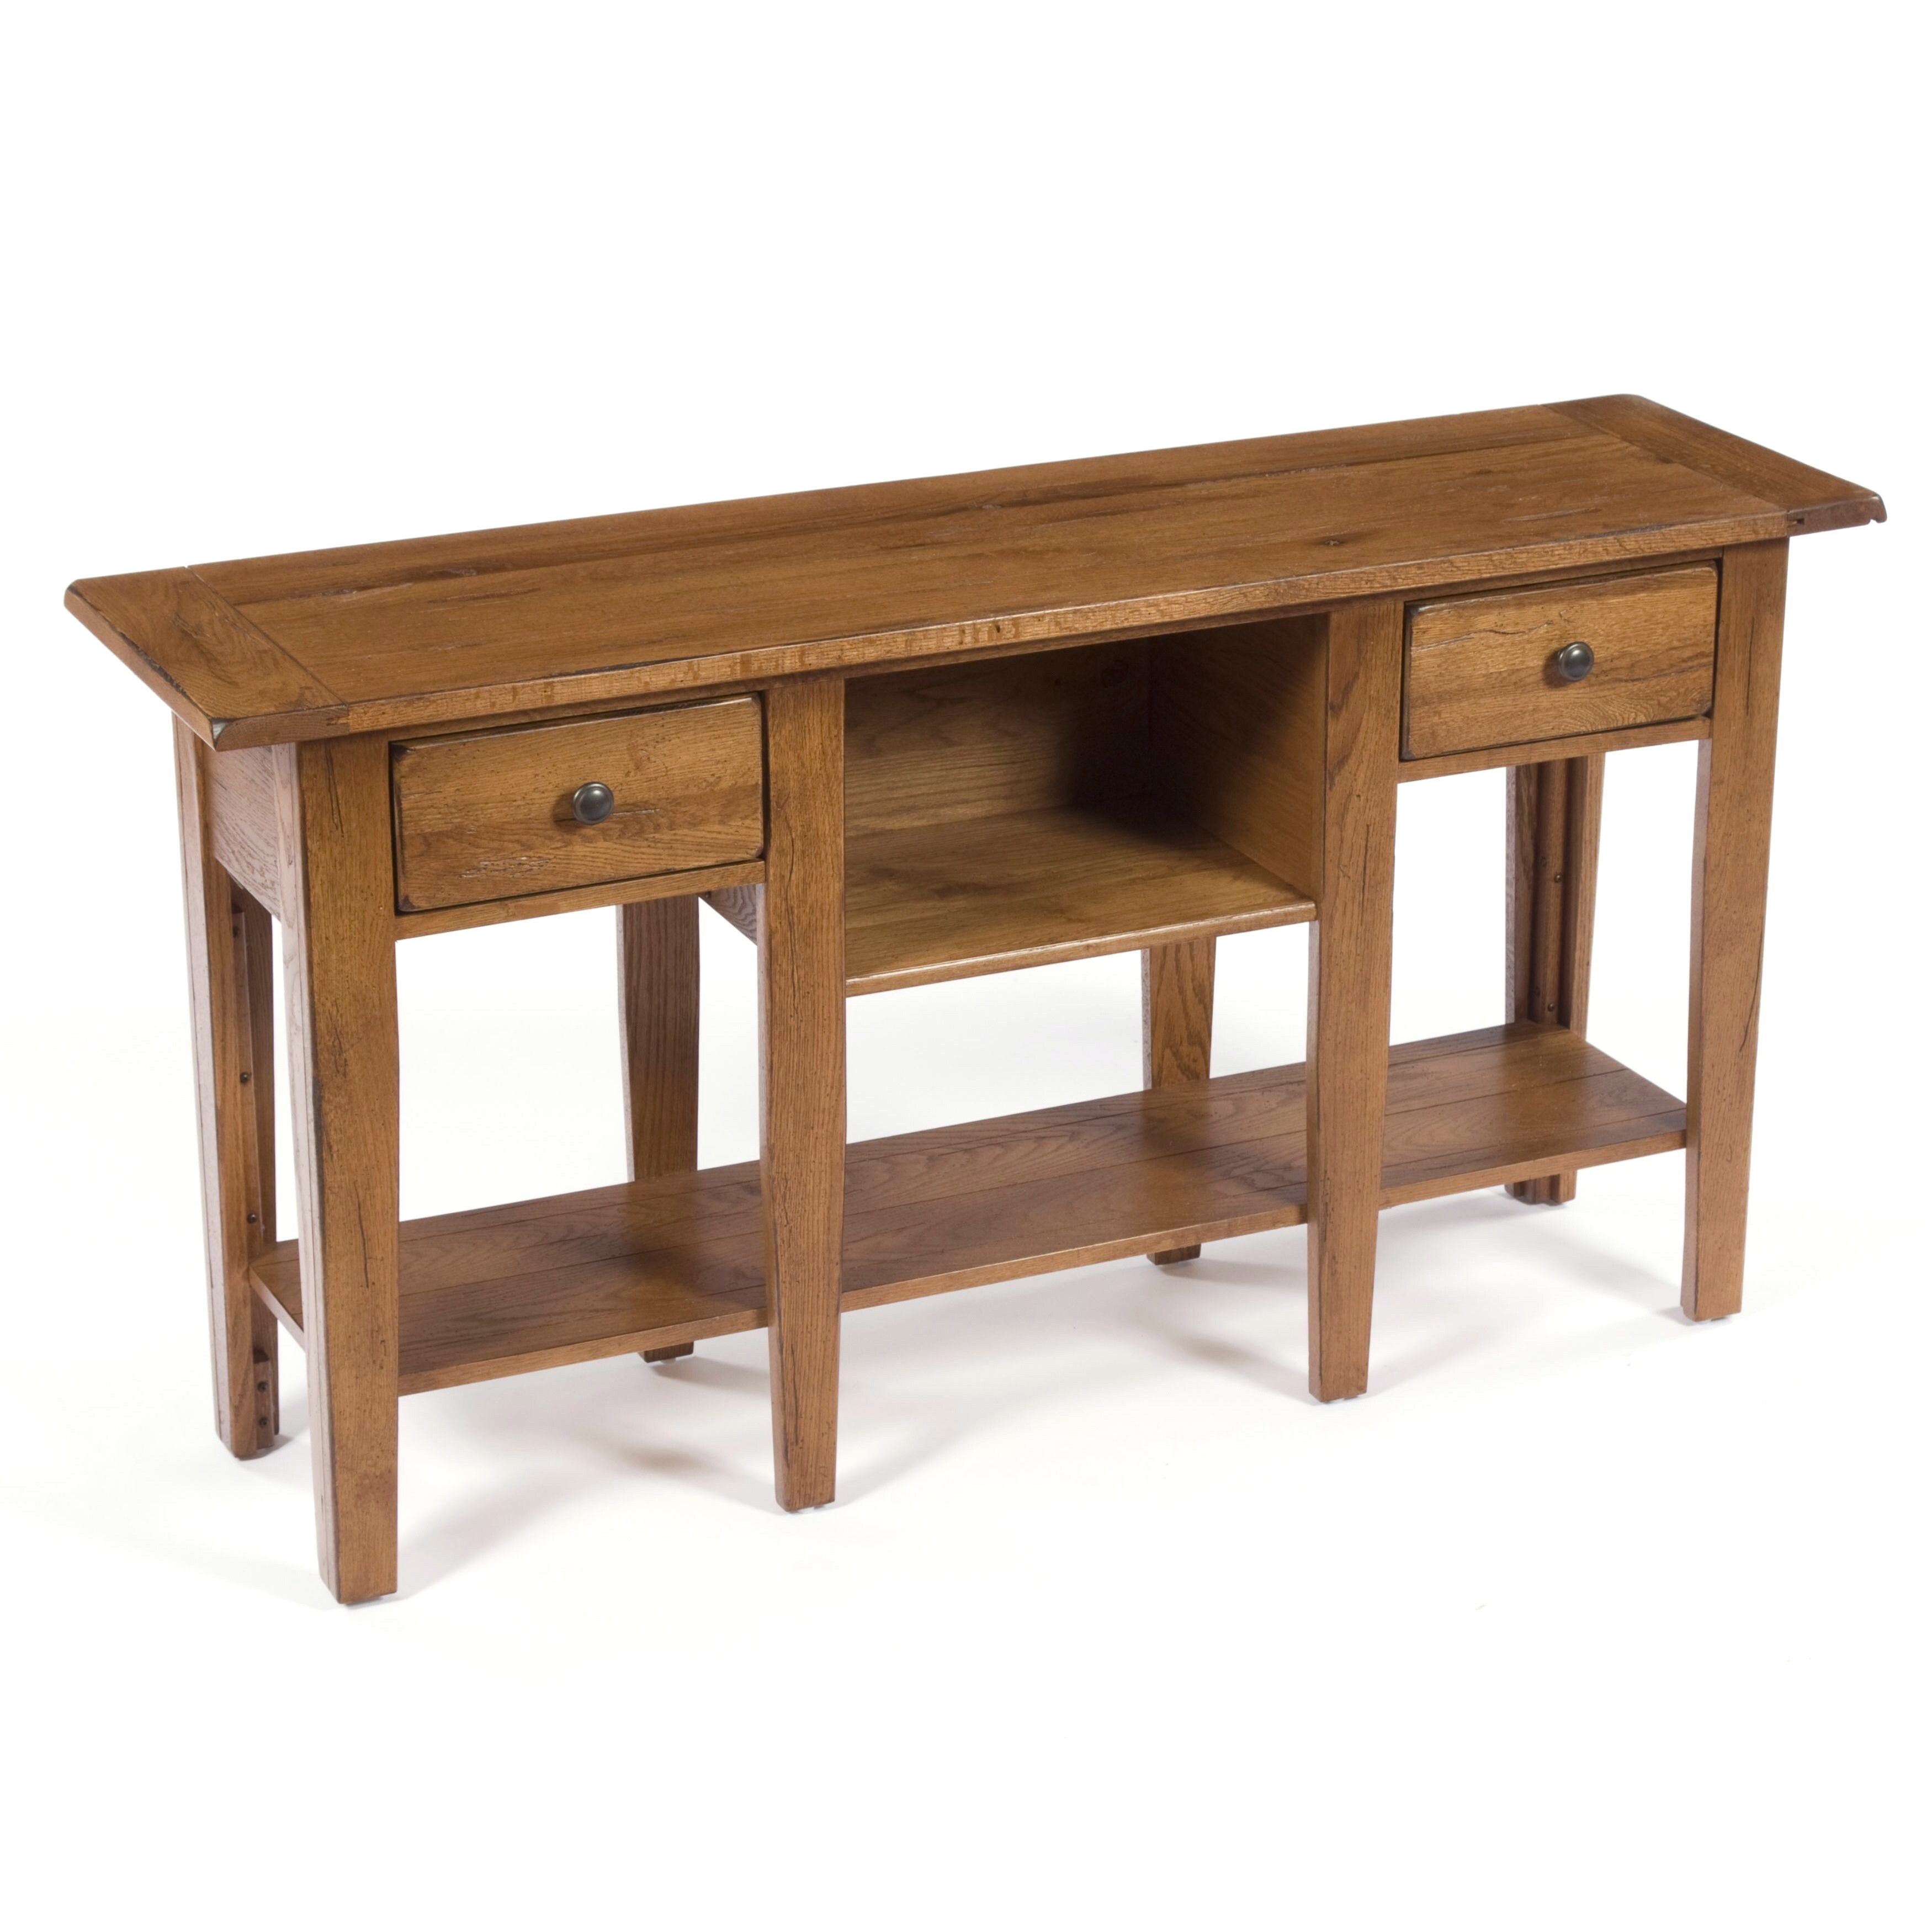 Shop Broyhill Attic Heirlooms Oak Console Table Overstock 12157617